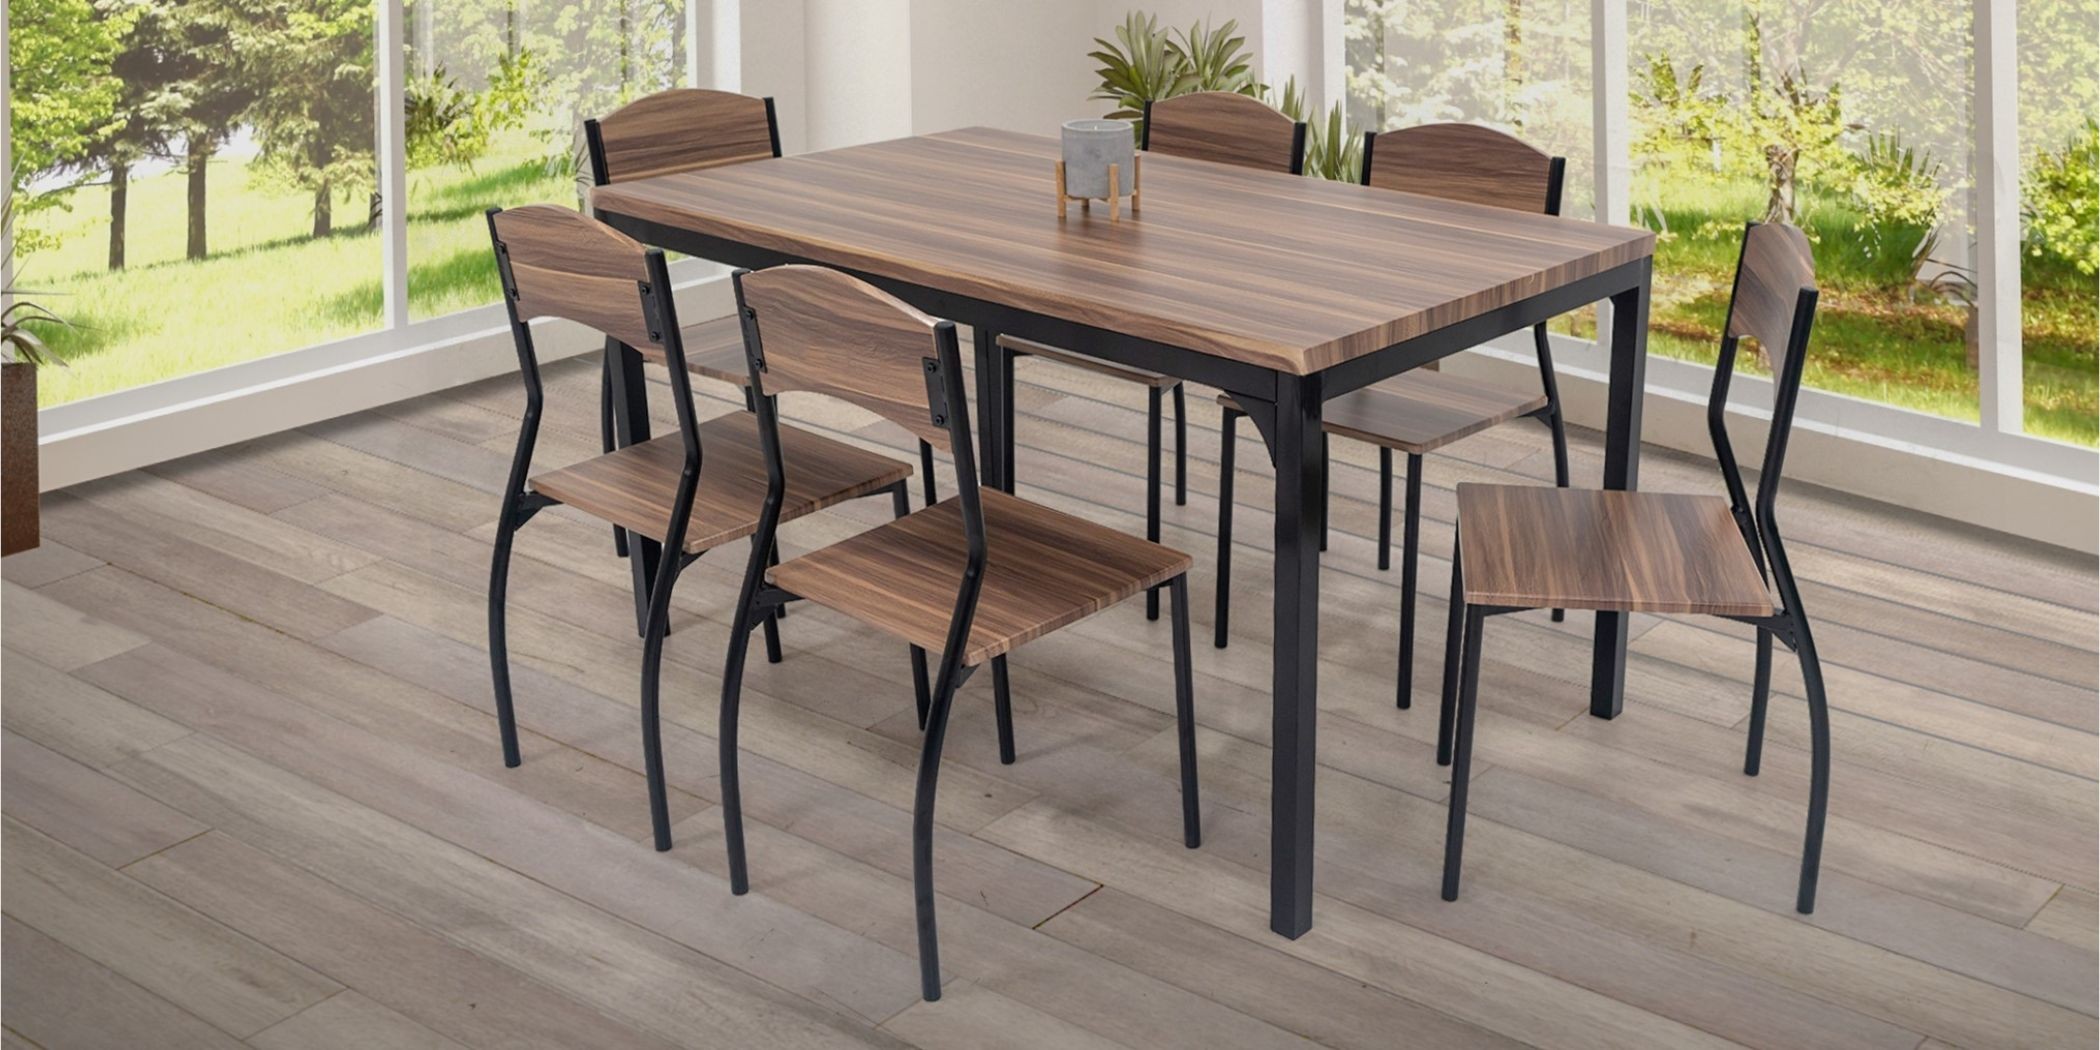 Viviana Table and 6 Chairs in Metal Black